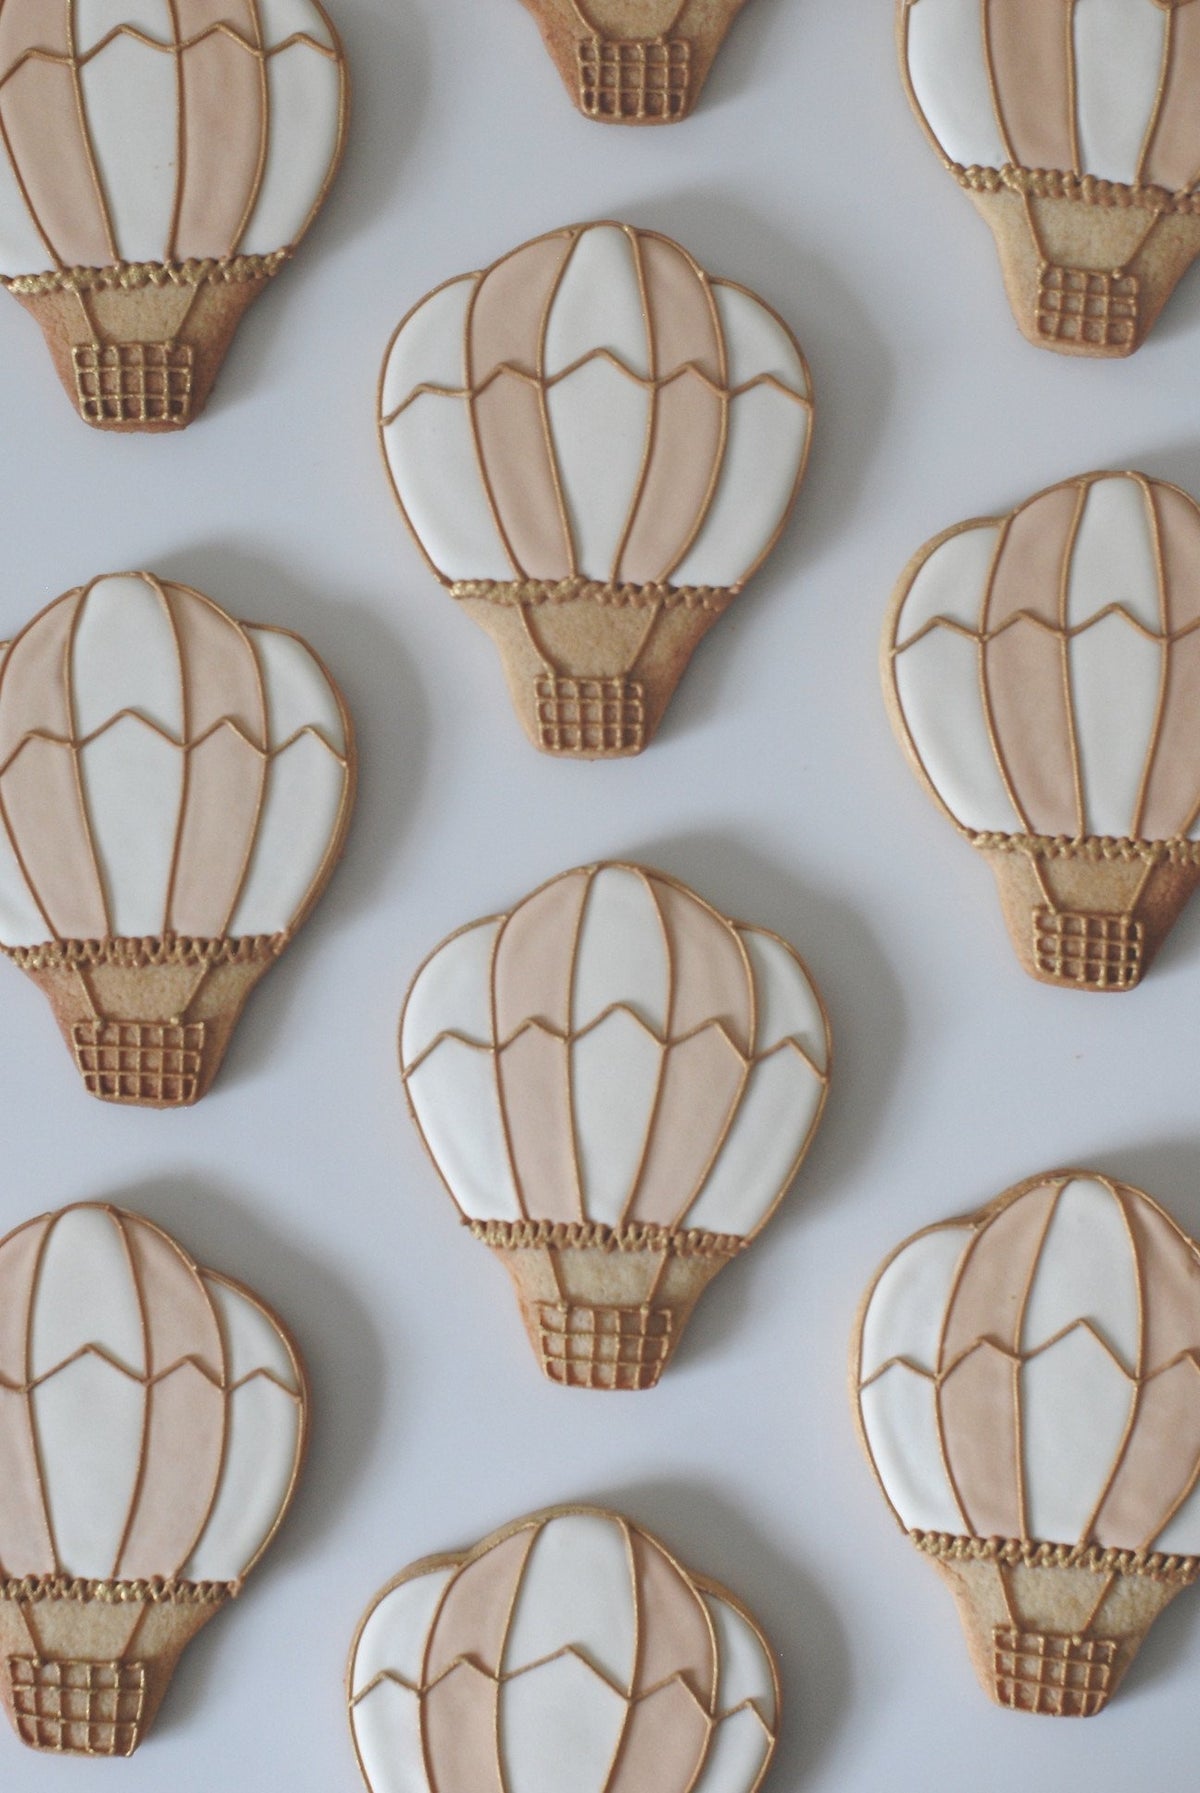 Hot Air Balloon Biscuits